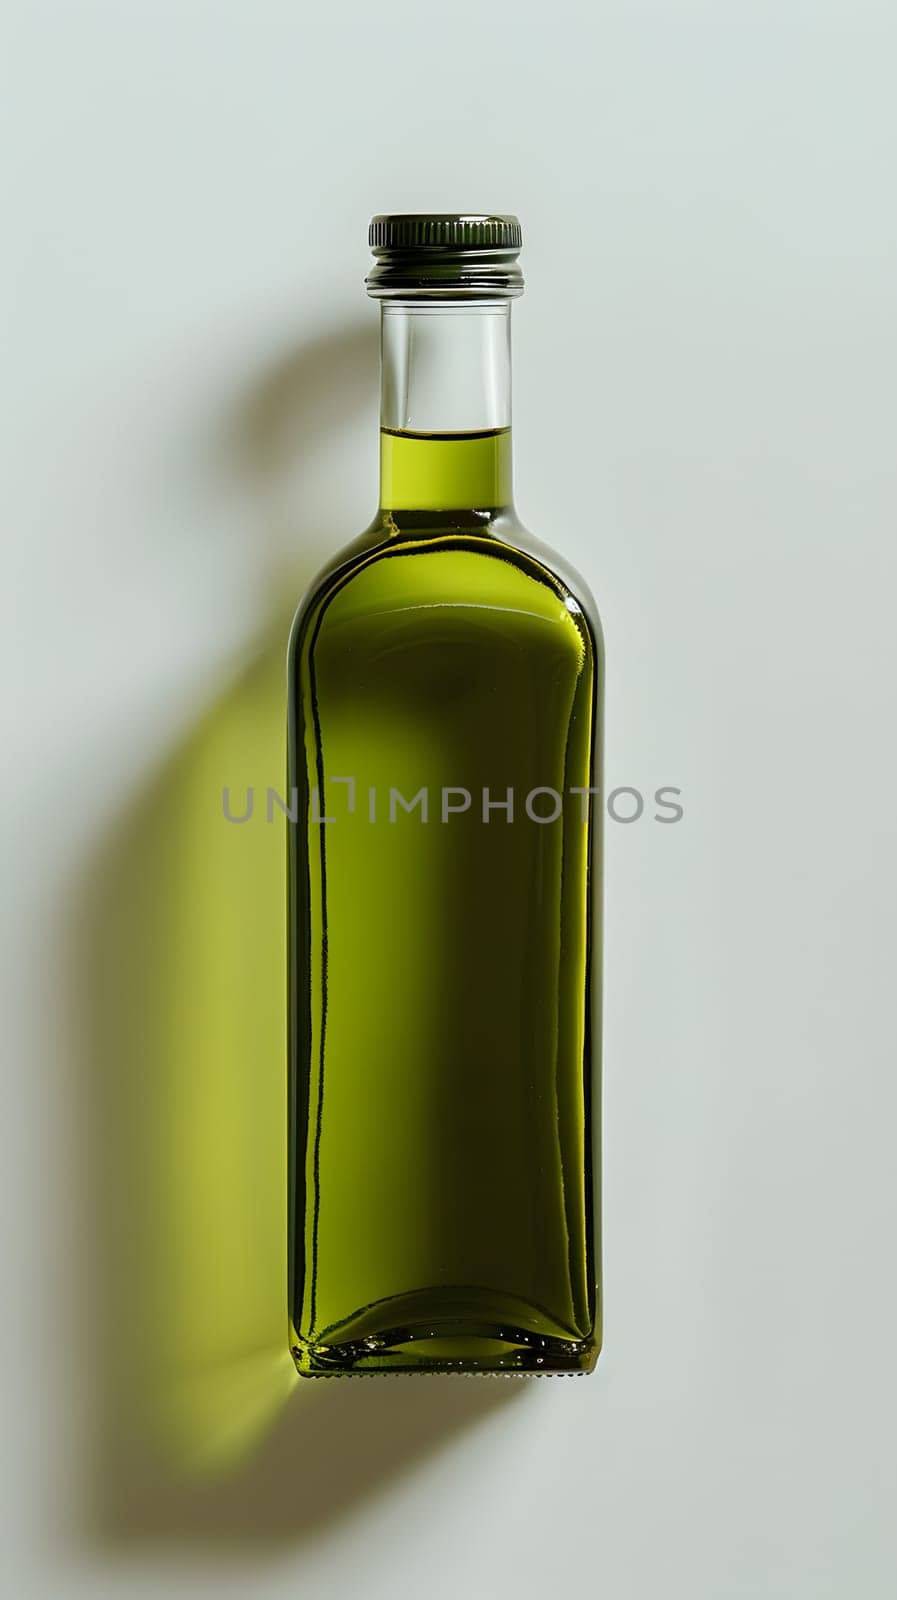 A glass bottle of olive oil is placed on a white table. The liquid inside the bottle is a solution used for cooking and dressing salads